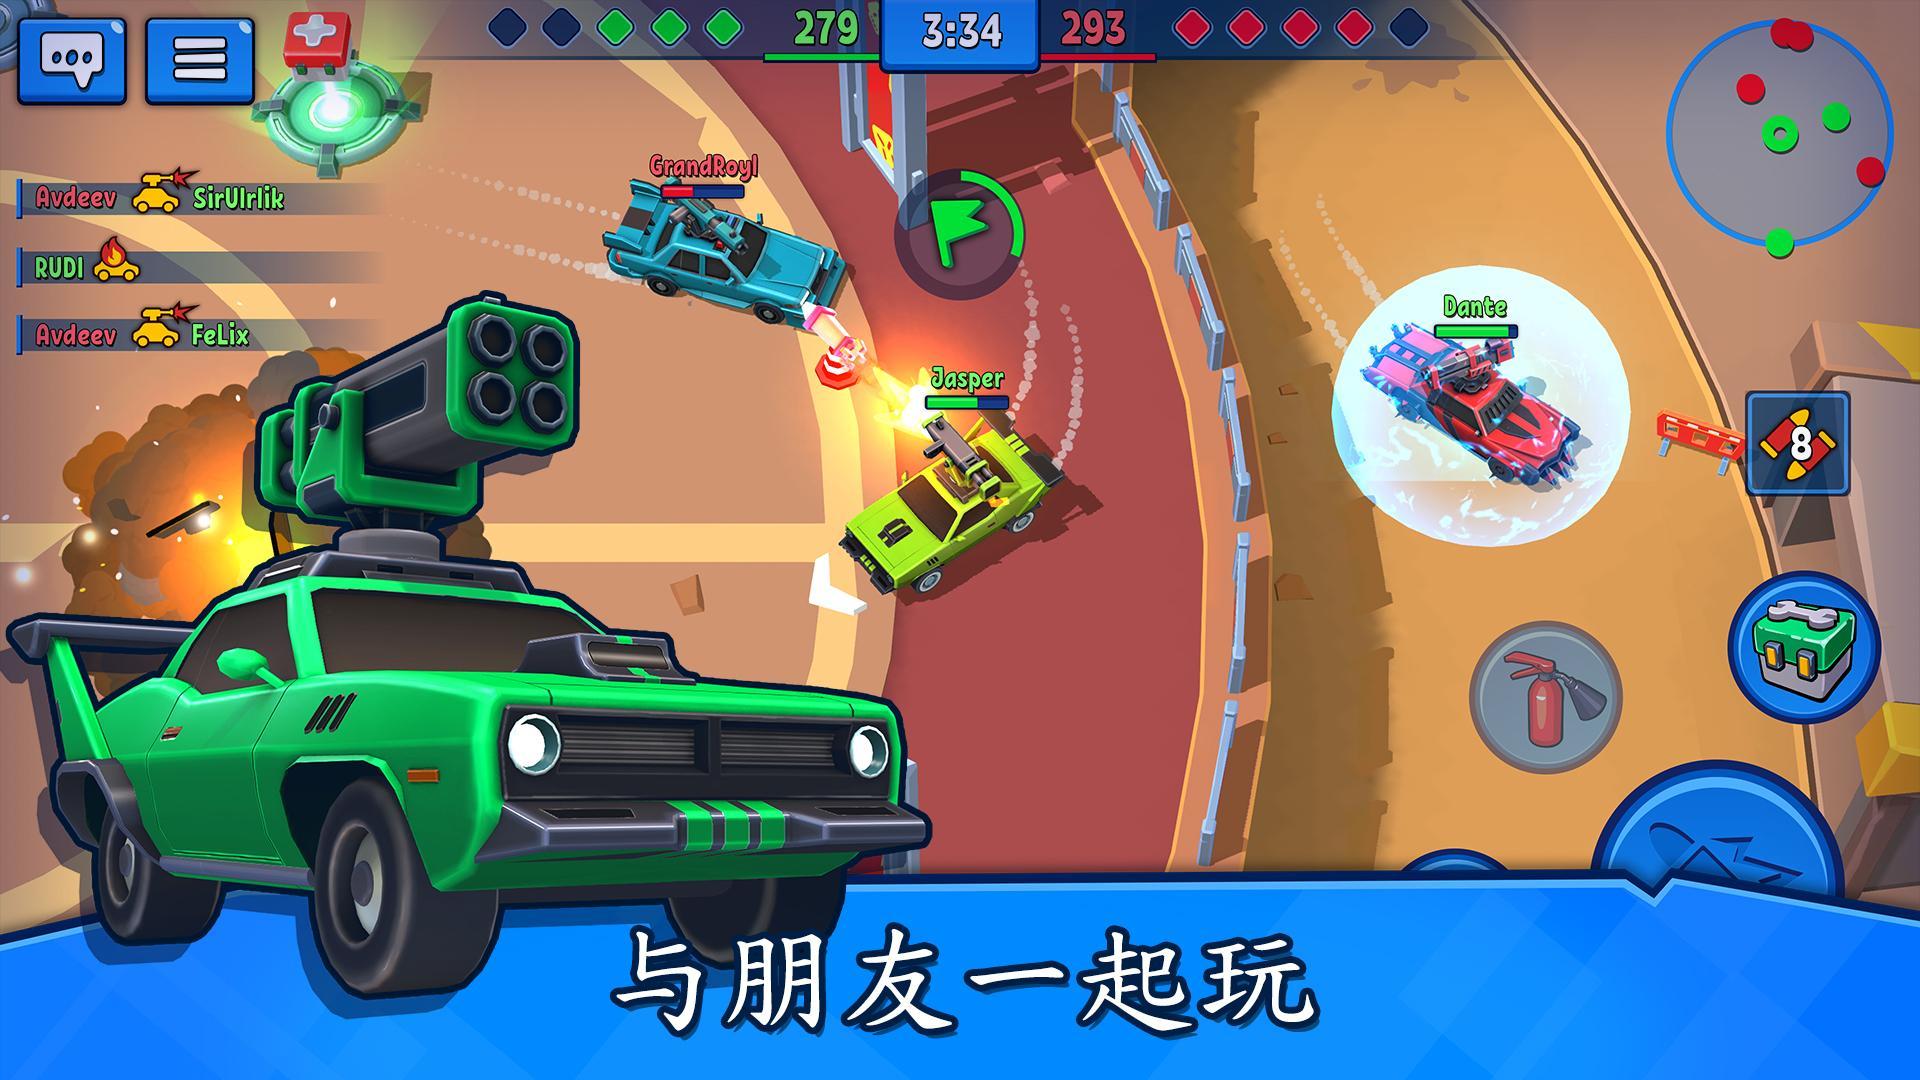 Banner of Car Force: PVP 자동차 싸움 4.67